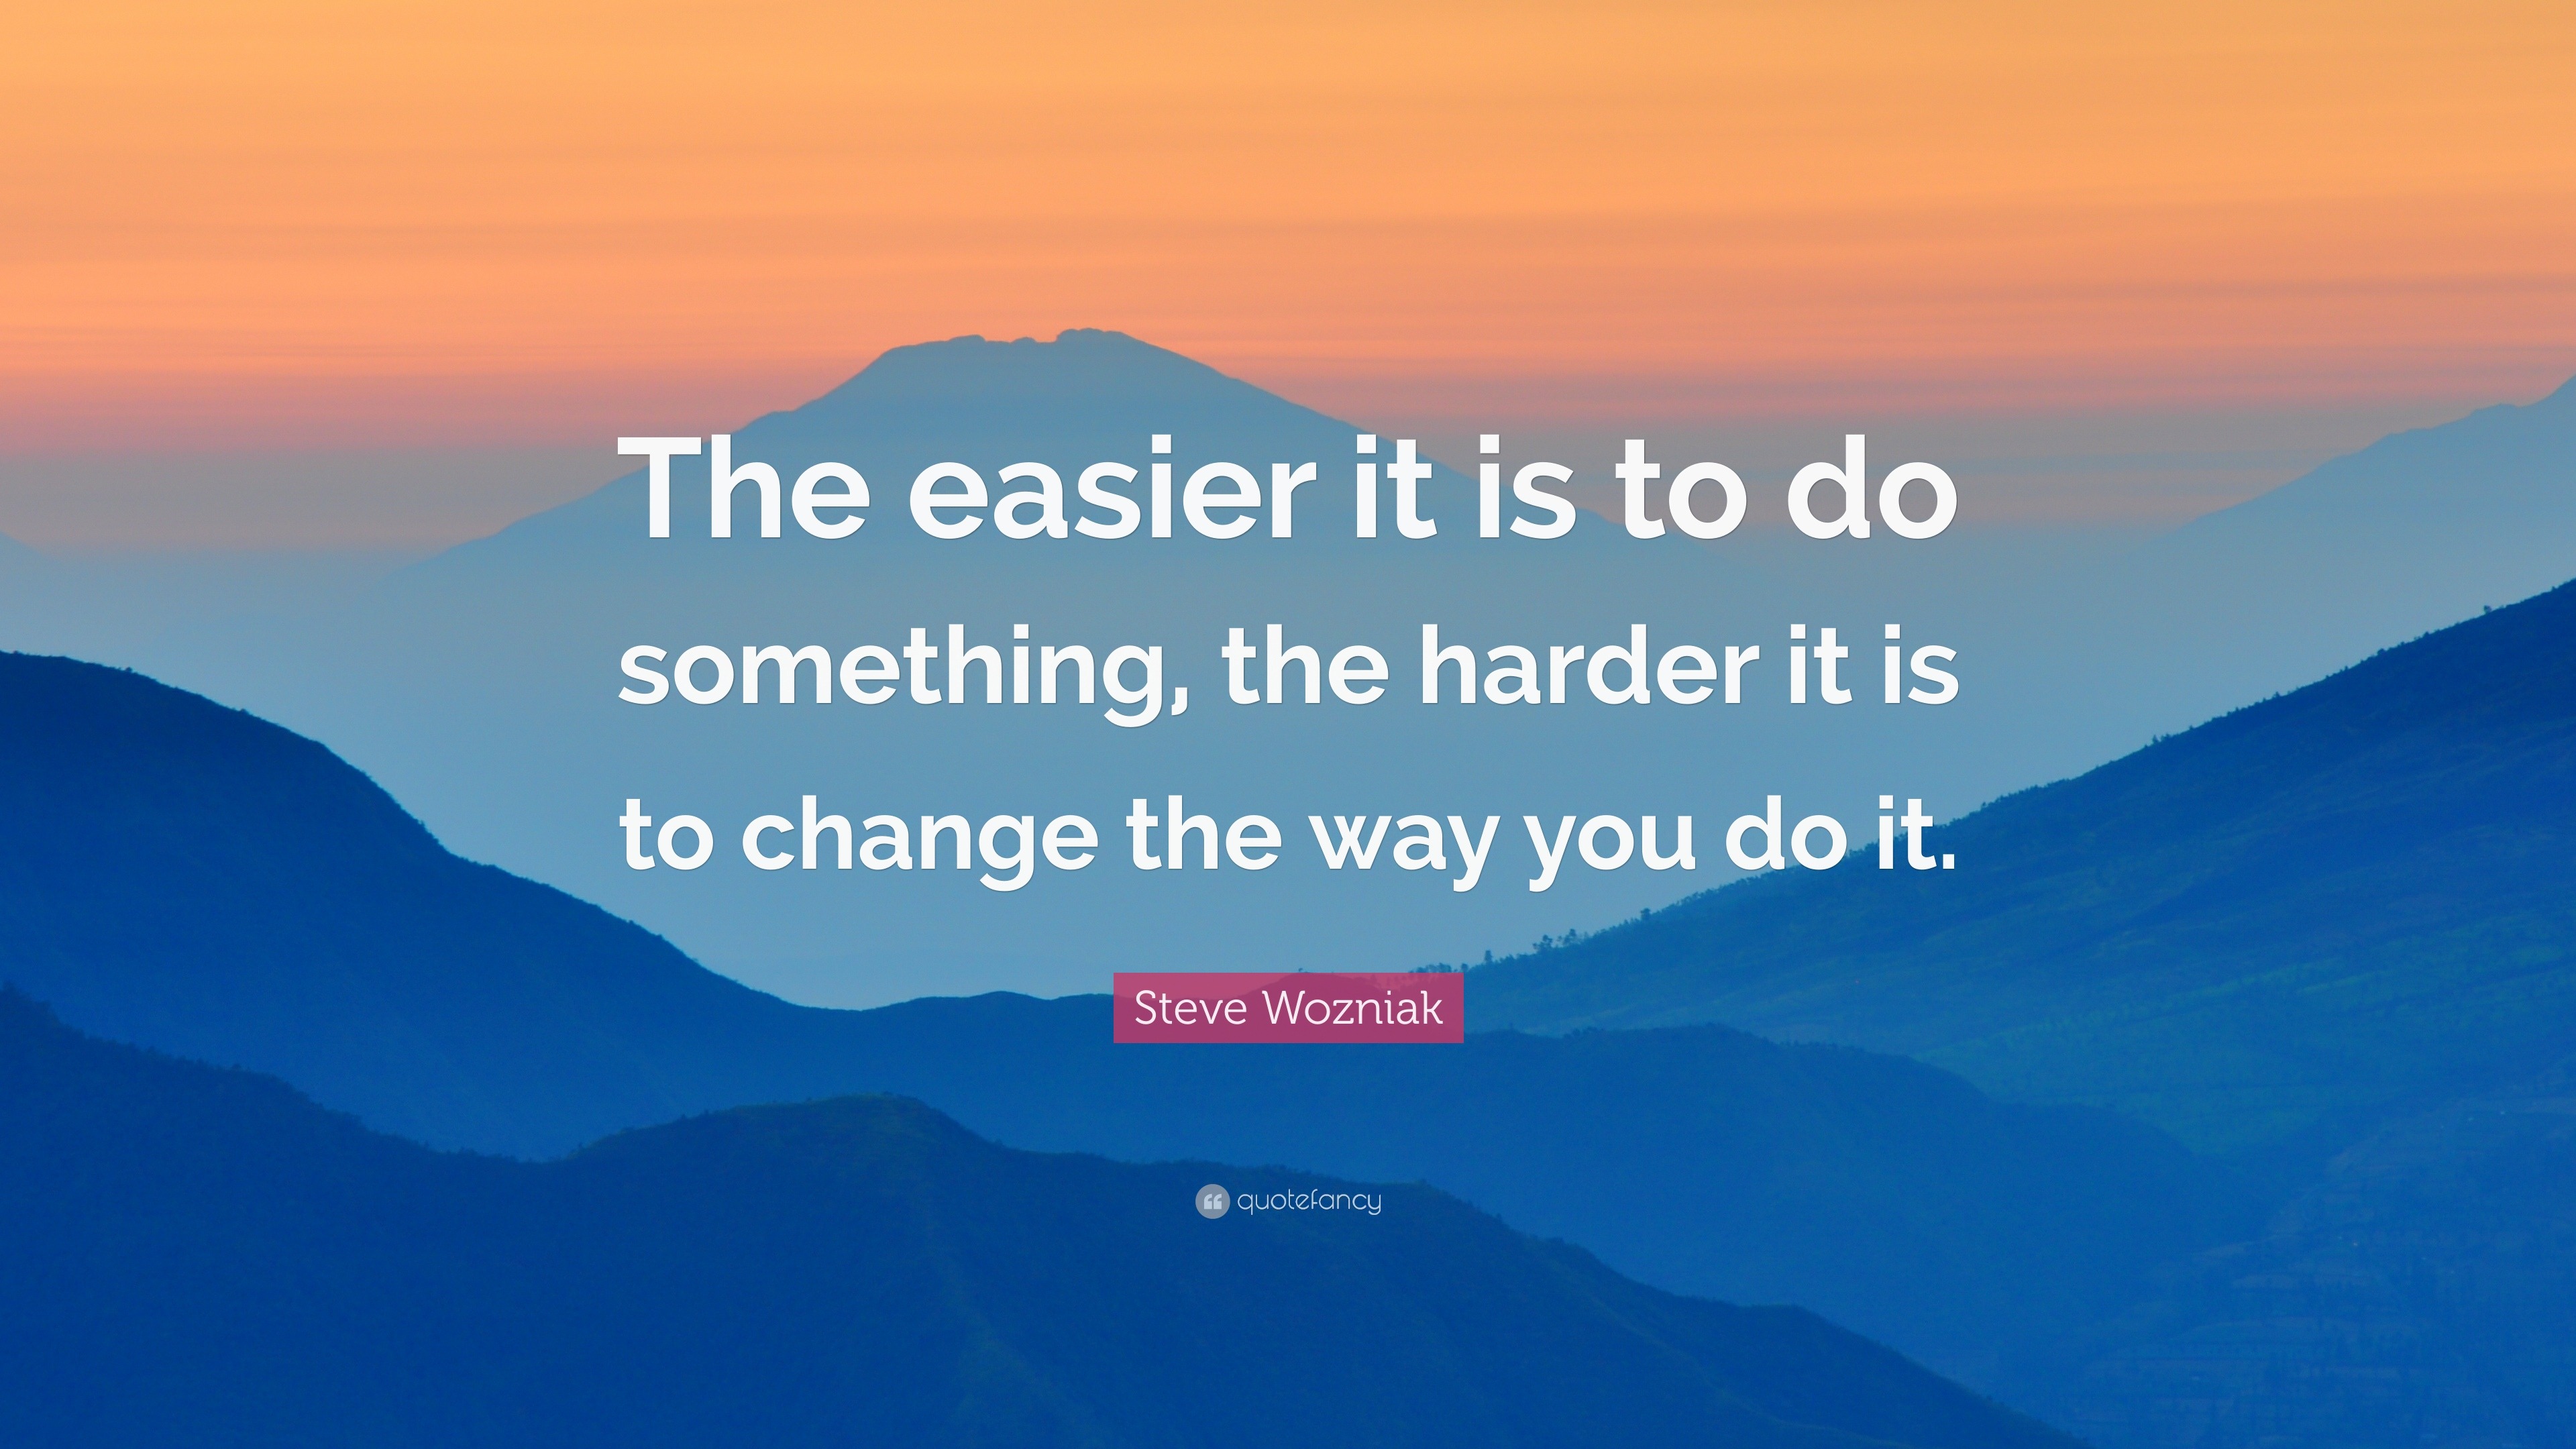 Steve Wozniak Quote: “The easier it is to do something, the harder it ...